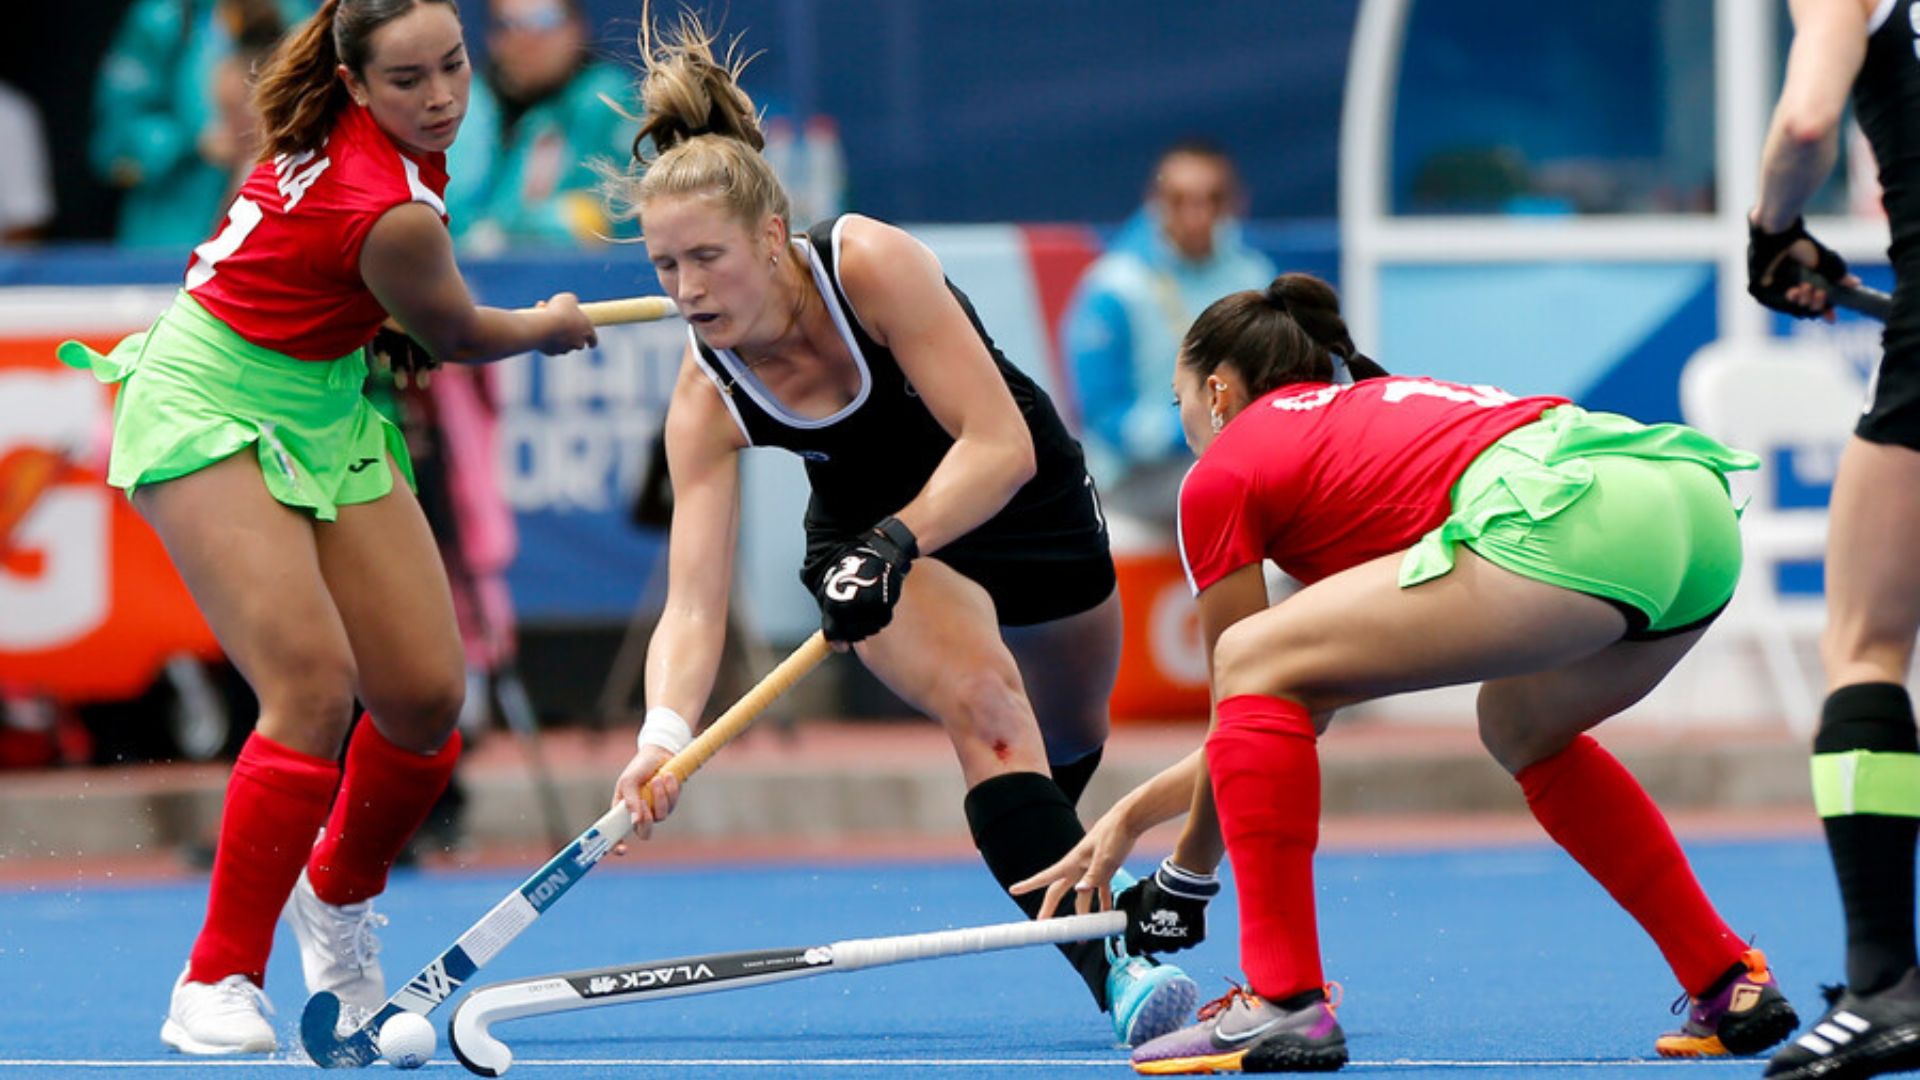 Canada wins and saves energy to face Argentina in field hockey